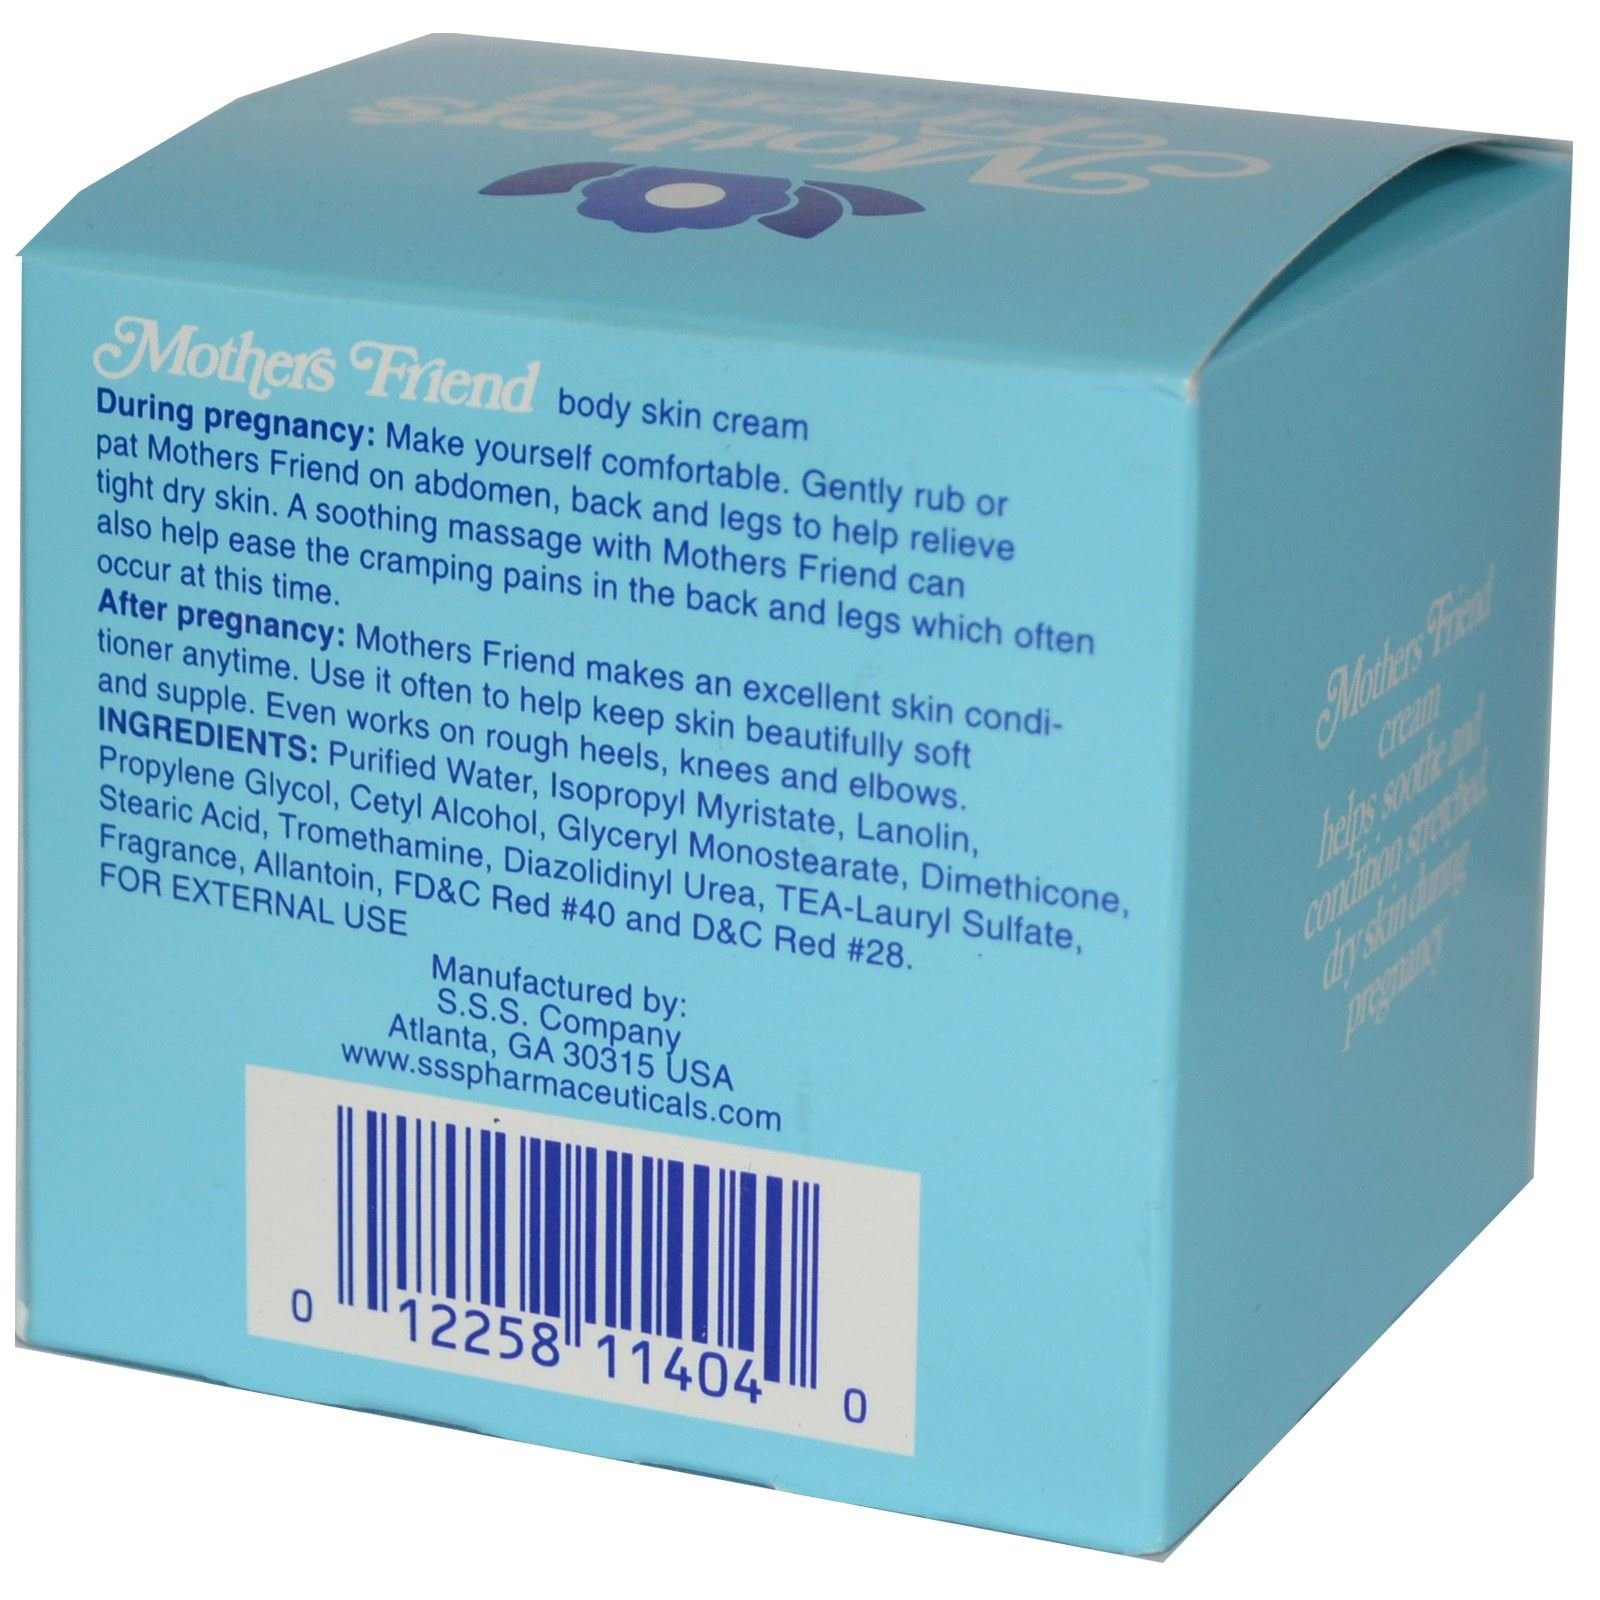 1 Pack of Mothers Friend Body and Skin Cream, for Stretched Tight and Dry Skin of Pregnancy